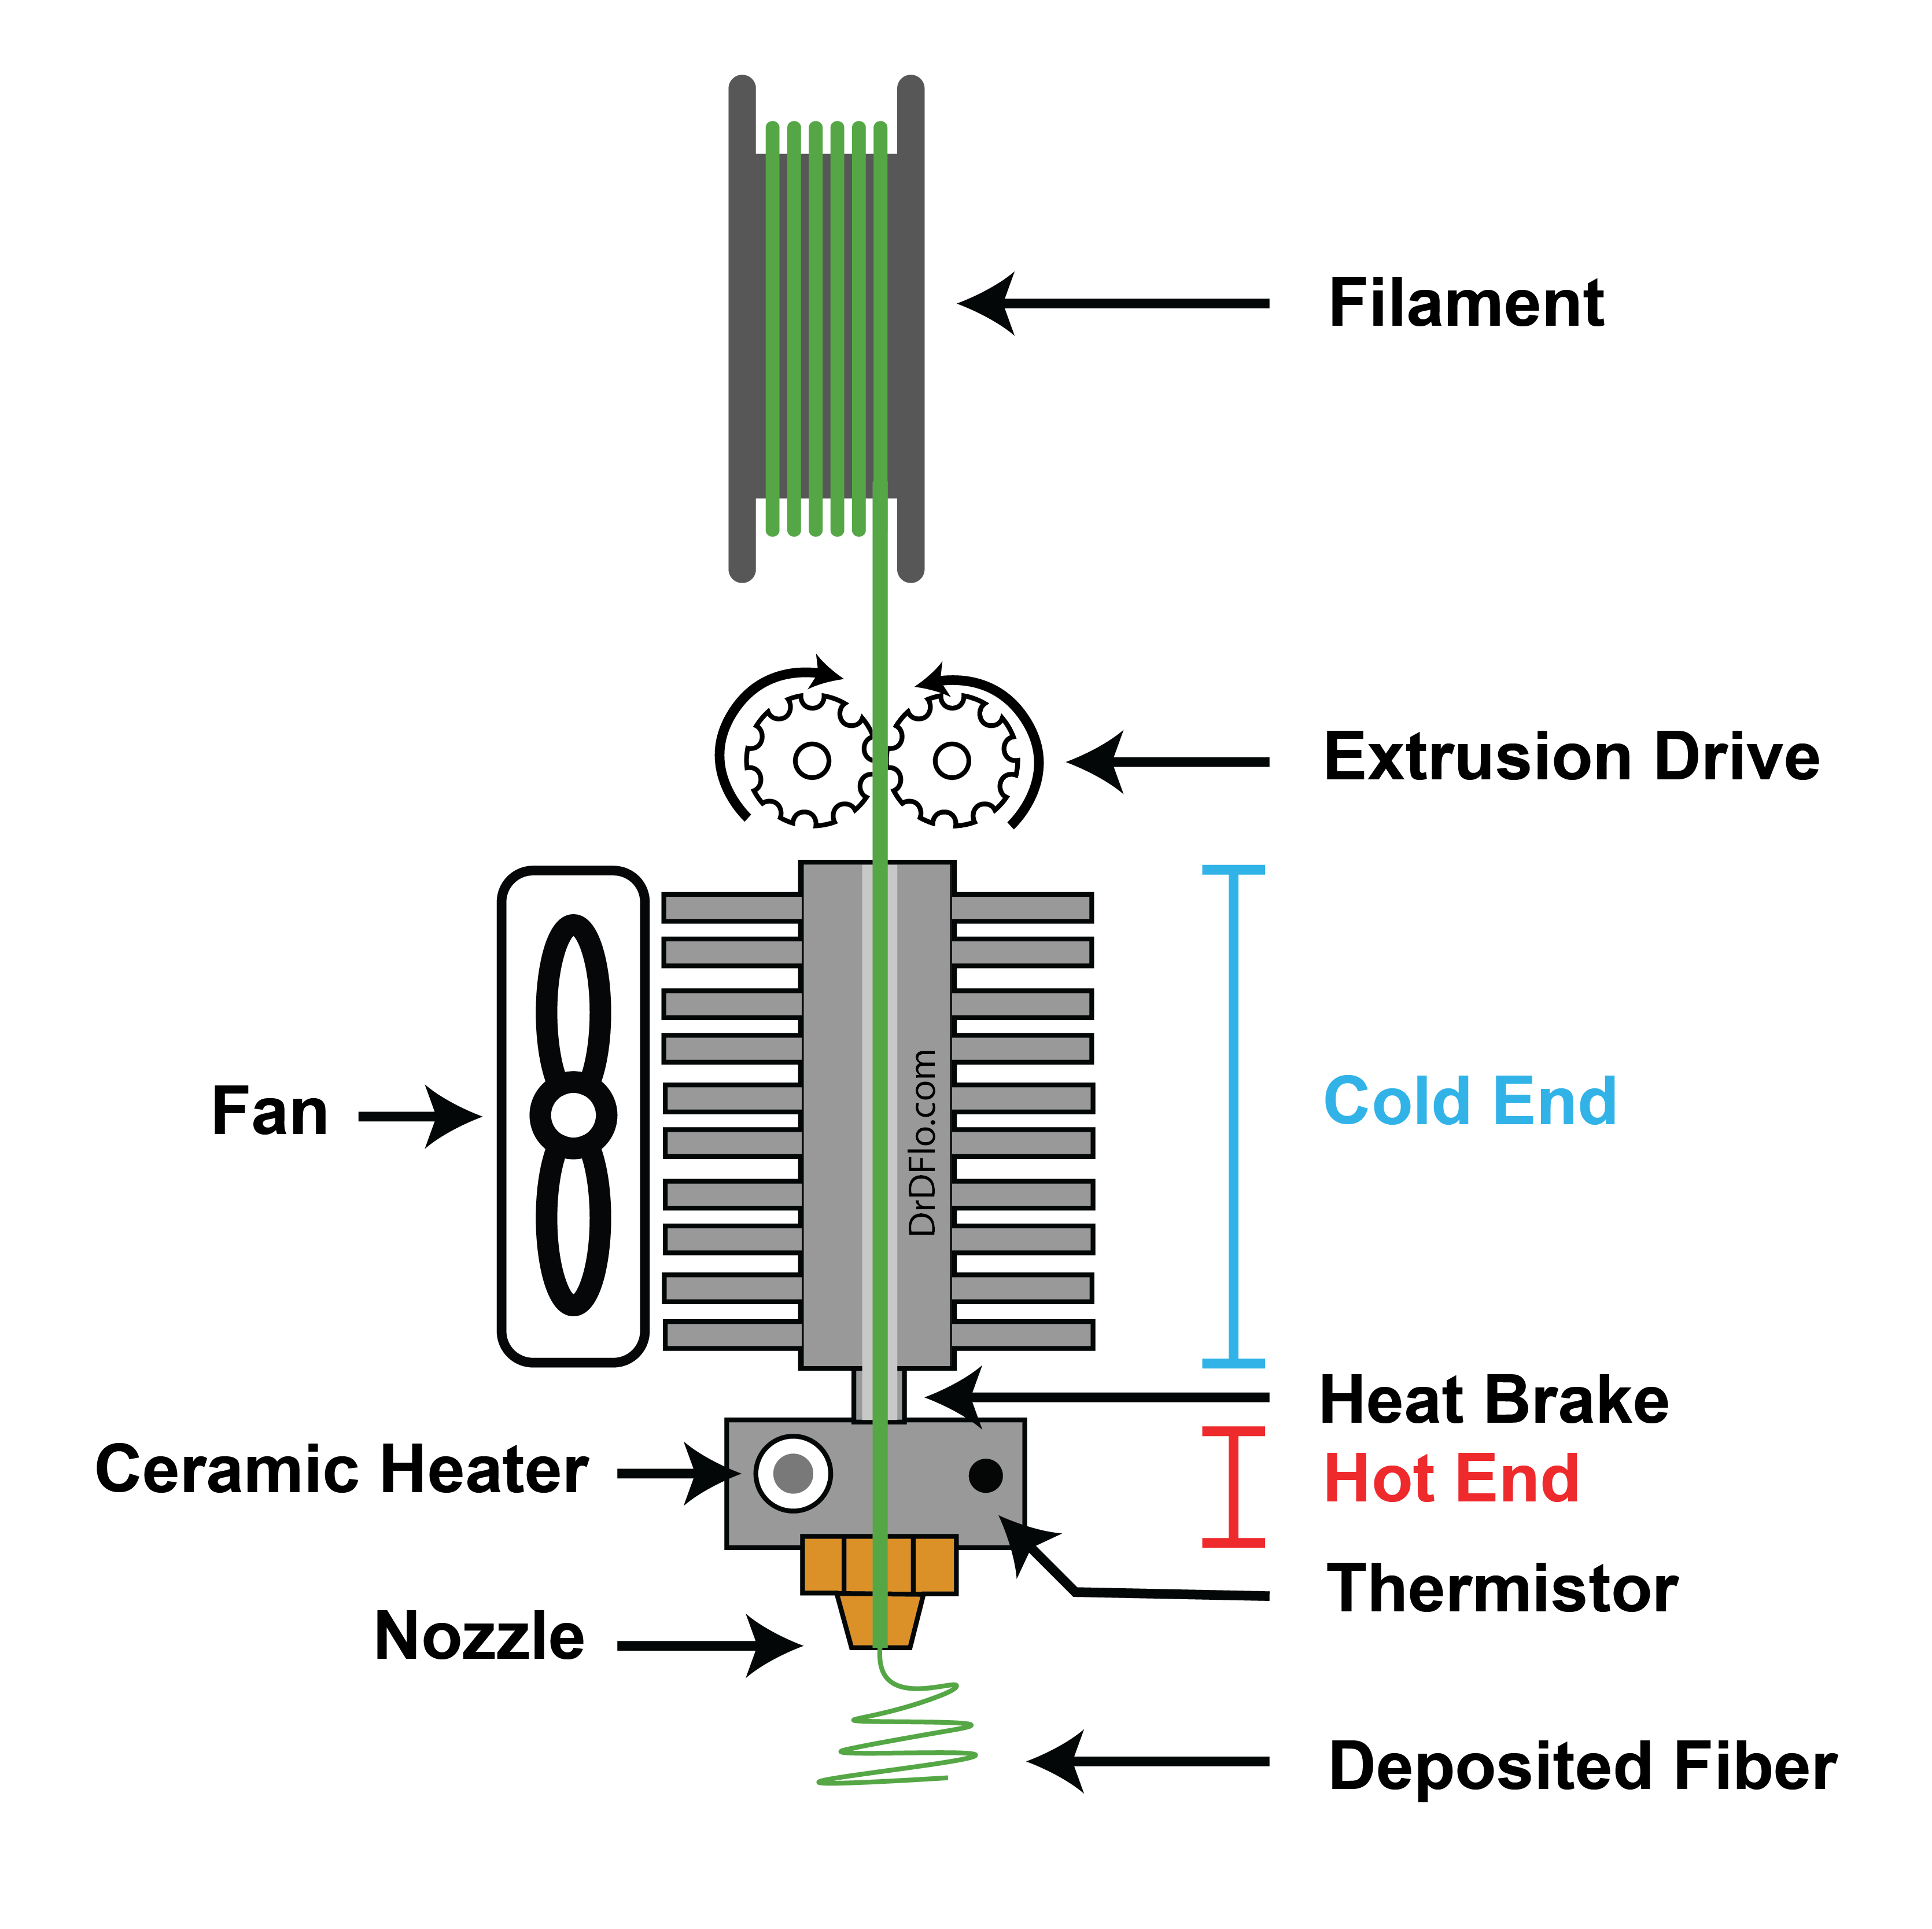 Anatomy of a filament extruder for a FFF or FDM 3D printer. The extrusion drive pushes filament into the extruder, which liquifies the plastic. The molten plastic is deposited as a fiber that is approximately the diameter of the nozzle. The cold end and heat break localize the heat to the hot end.